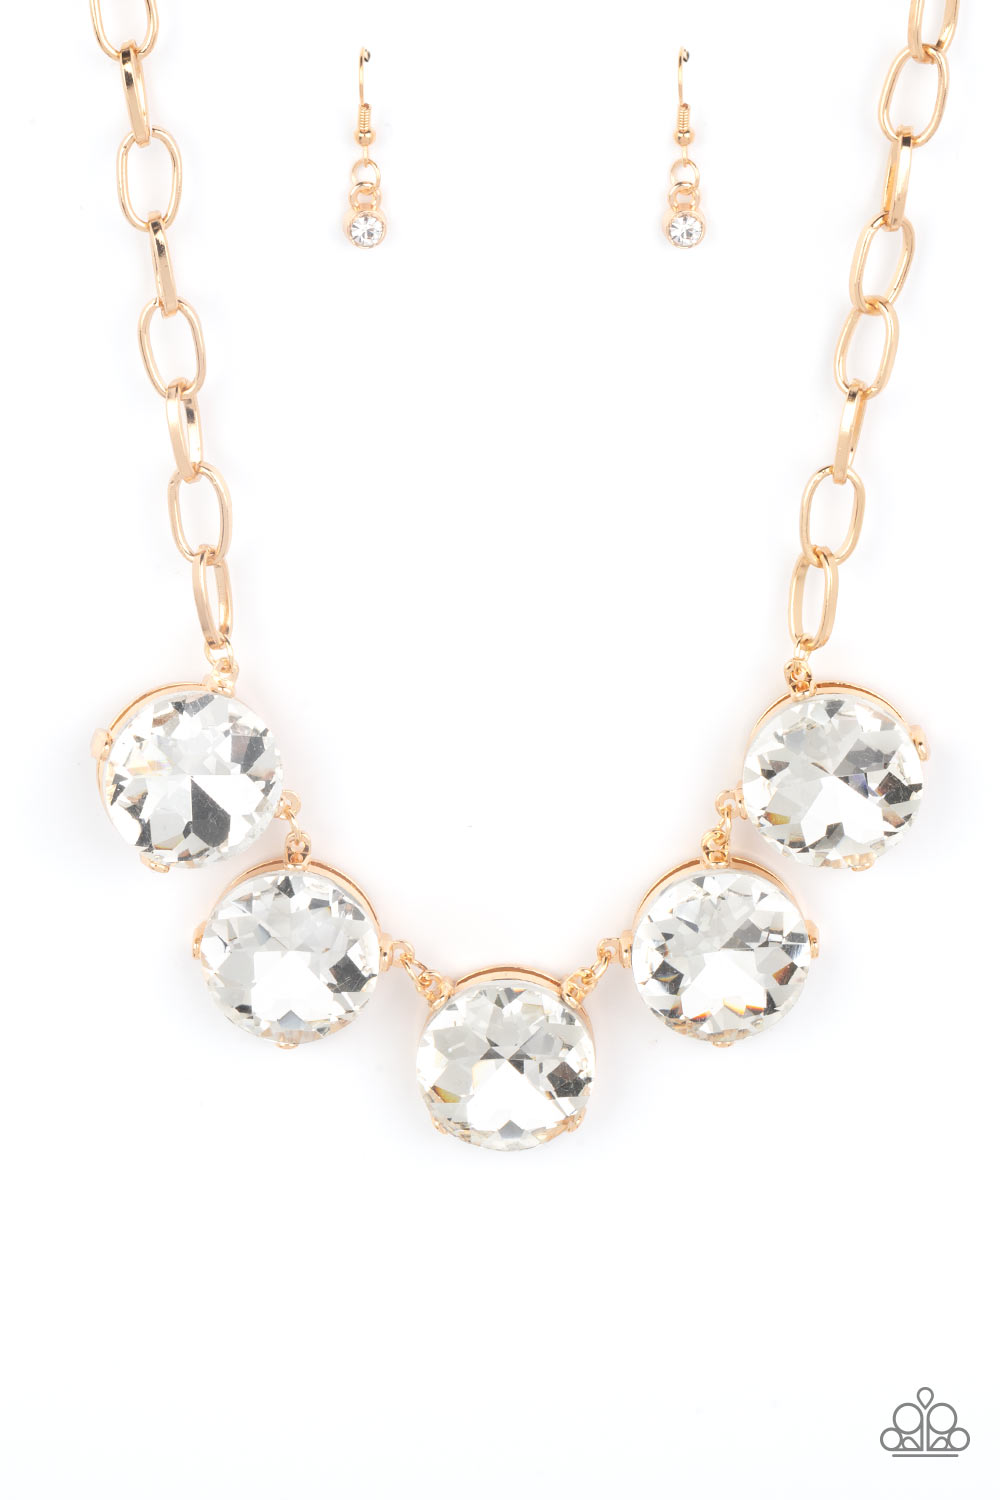 Limelight Luxury - Gold Necklace - Paparazzi Accessories - Five dramatically oversized white rhinestones connect across the collar and attach to an oversized gold chain creating a stunning spot-light loving statement piece.